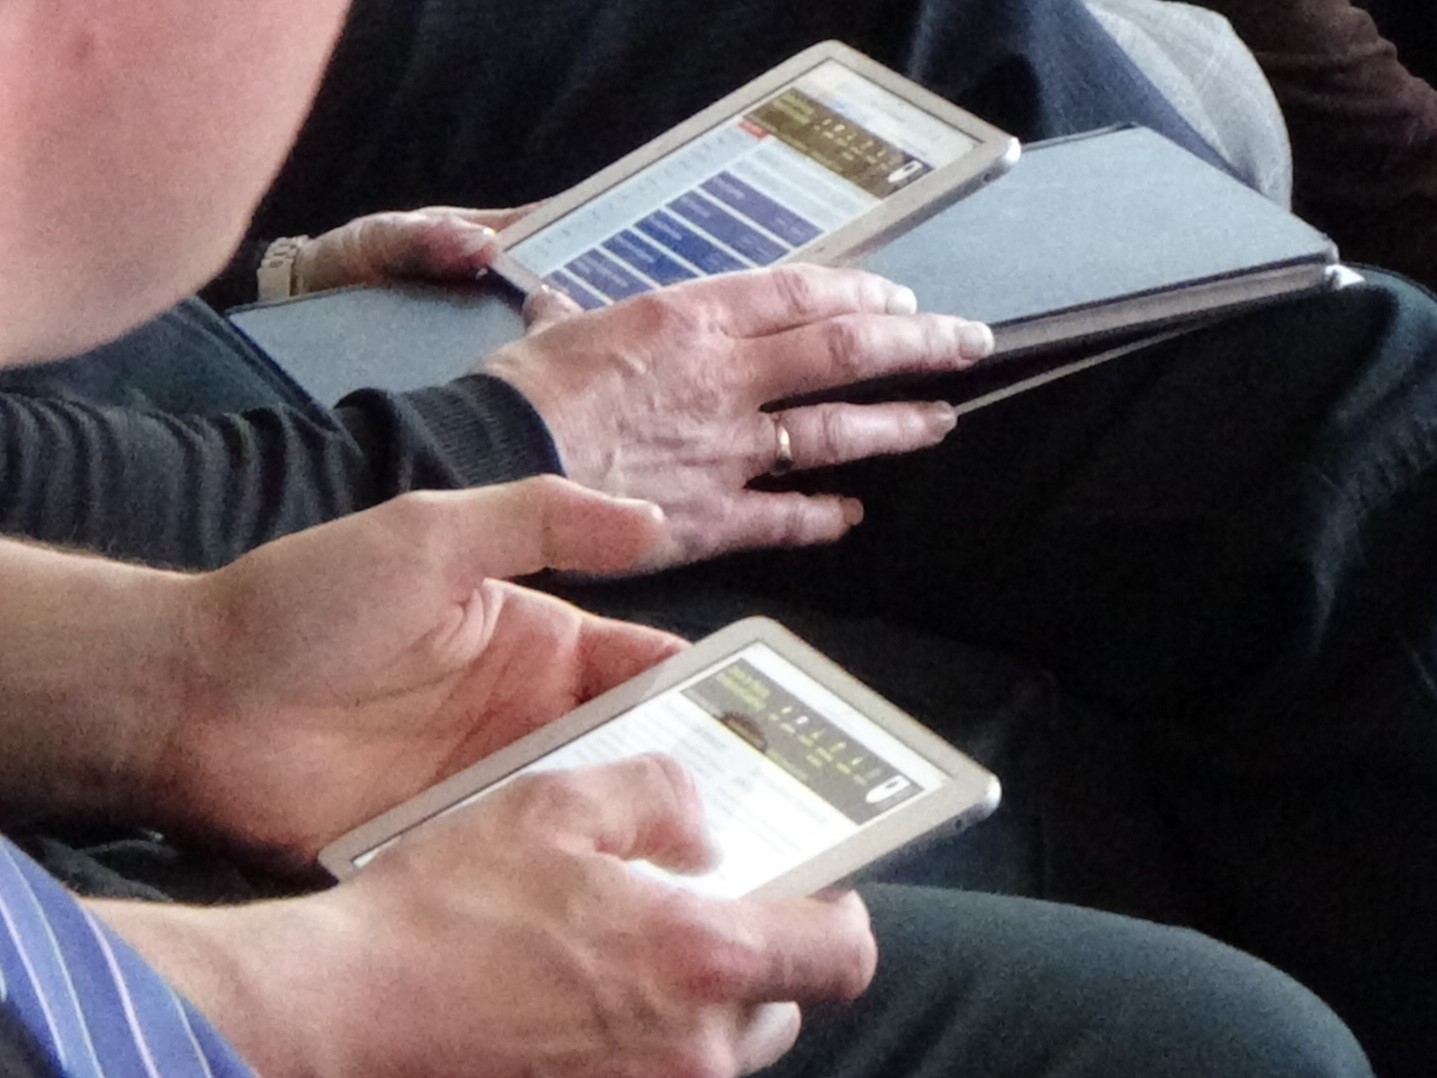 People holding tablets